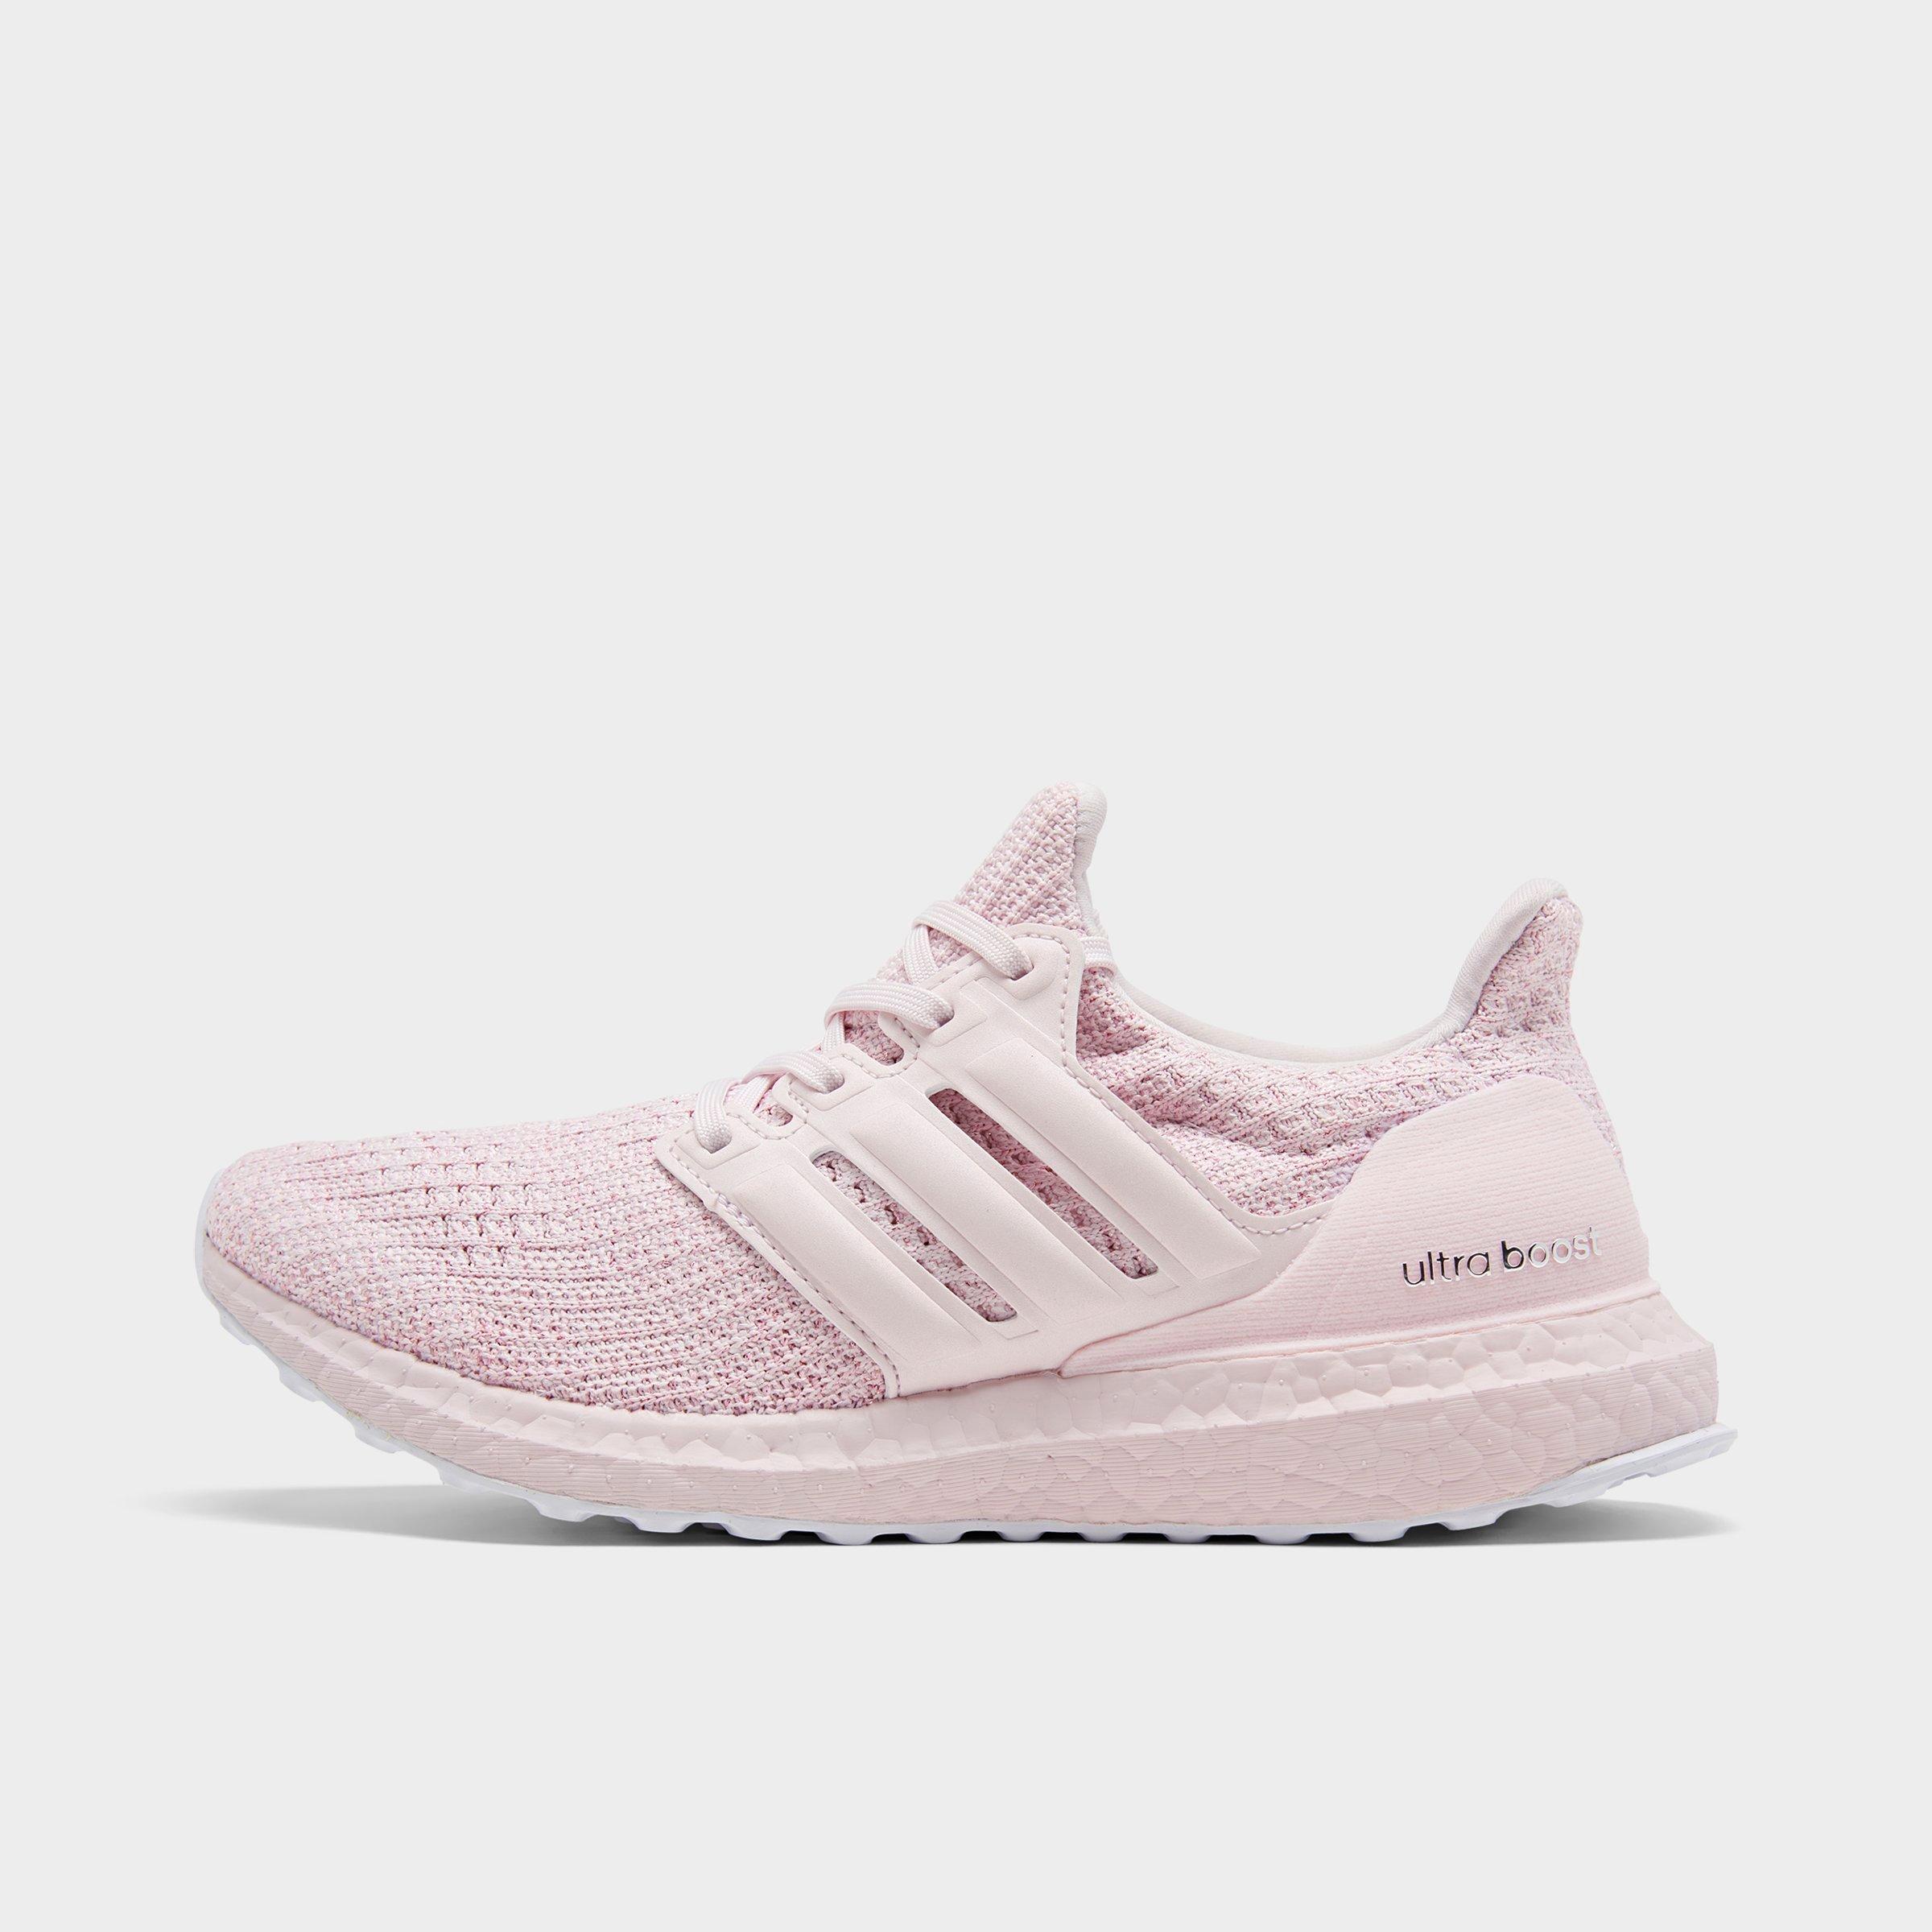 adidas ultra boost orchid tint women's